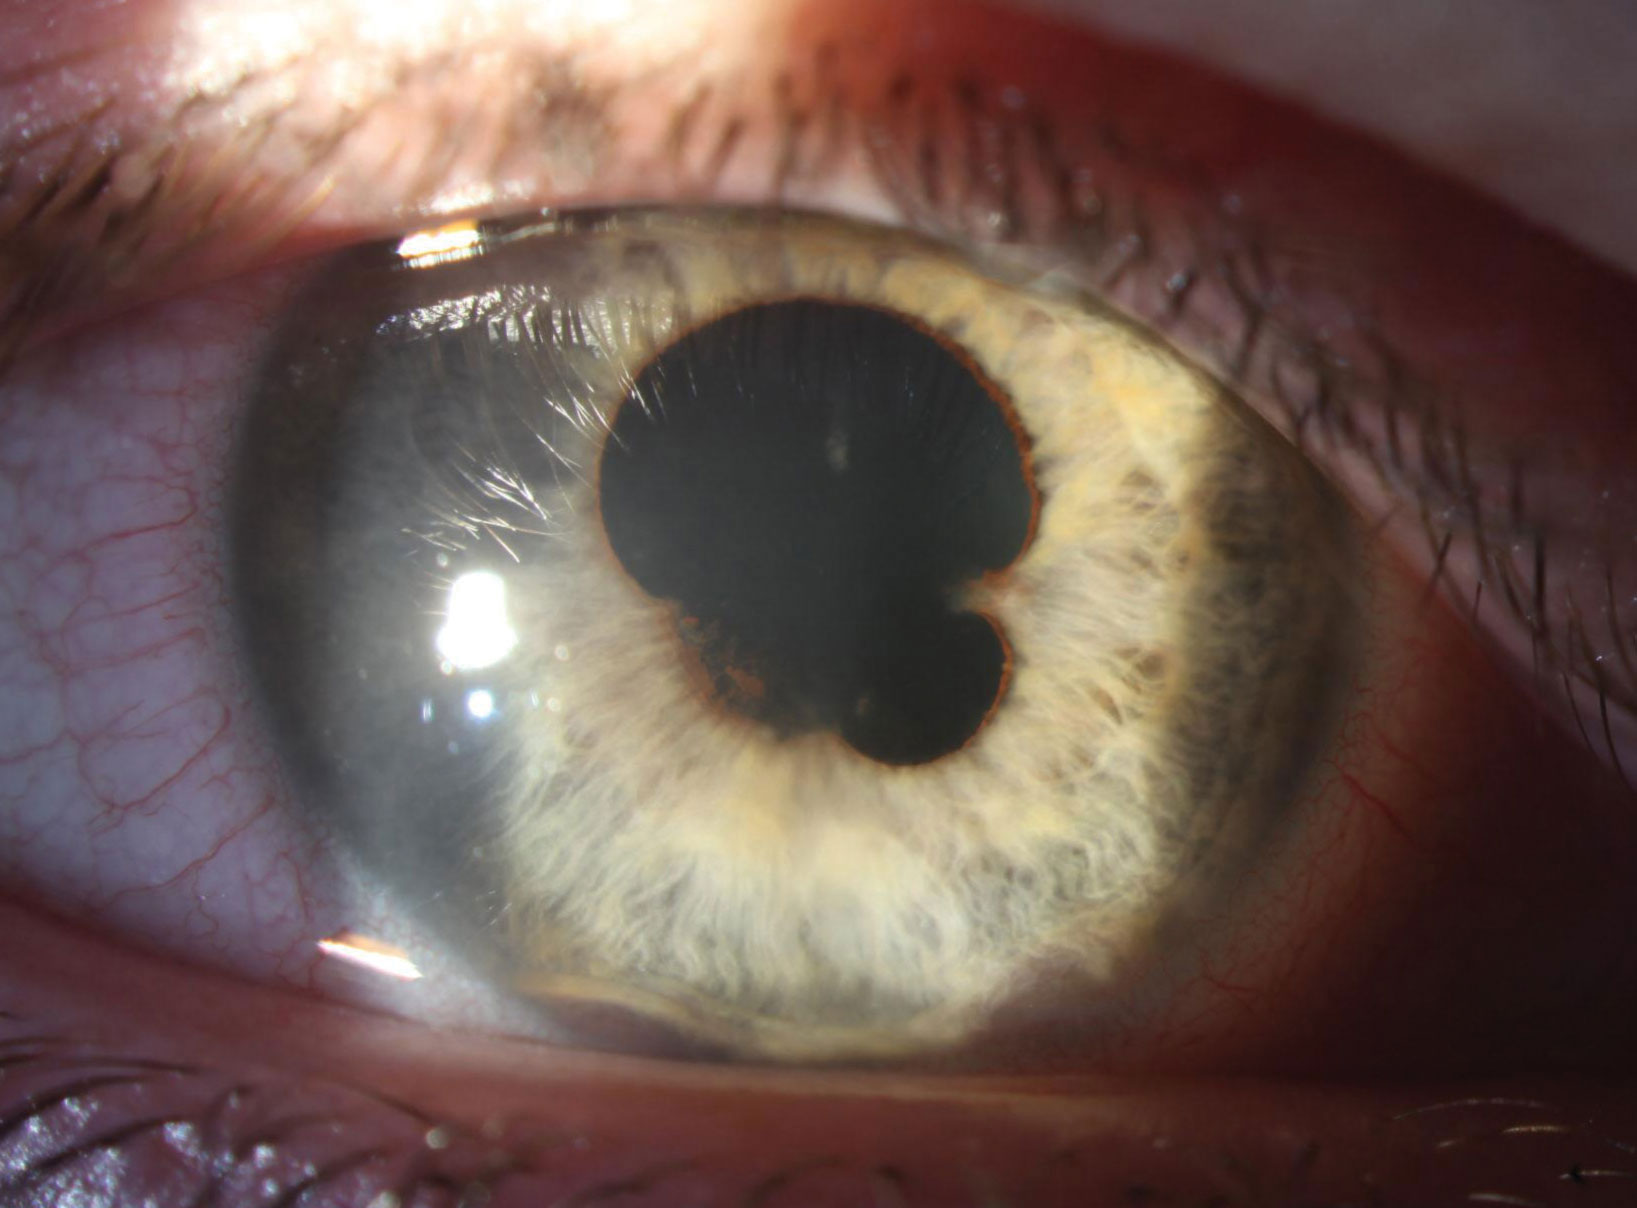 Broad and extensive posterior synechia are present in the right eye at presentation. Substantial anterior synechia are also apparent at 5 o’clock and 7 o’clock.